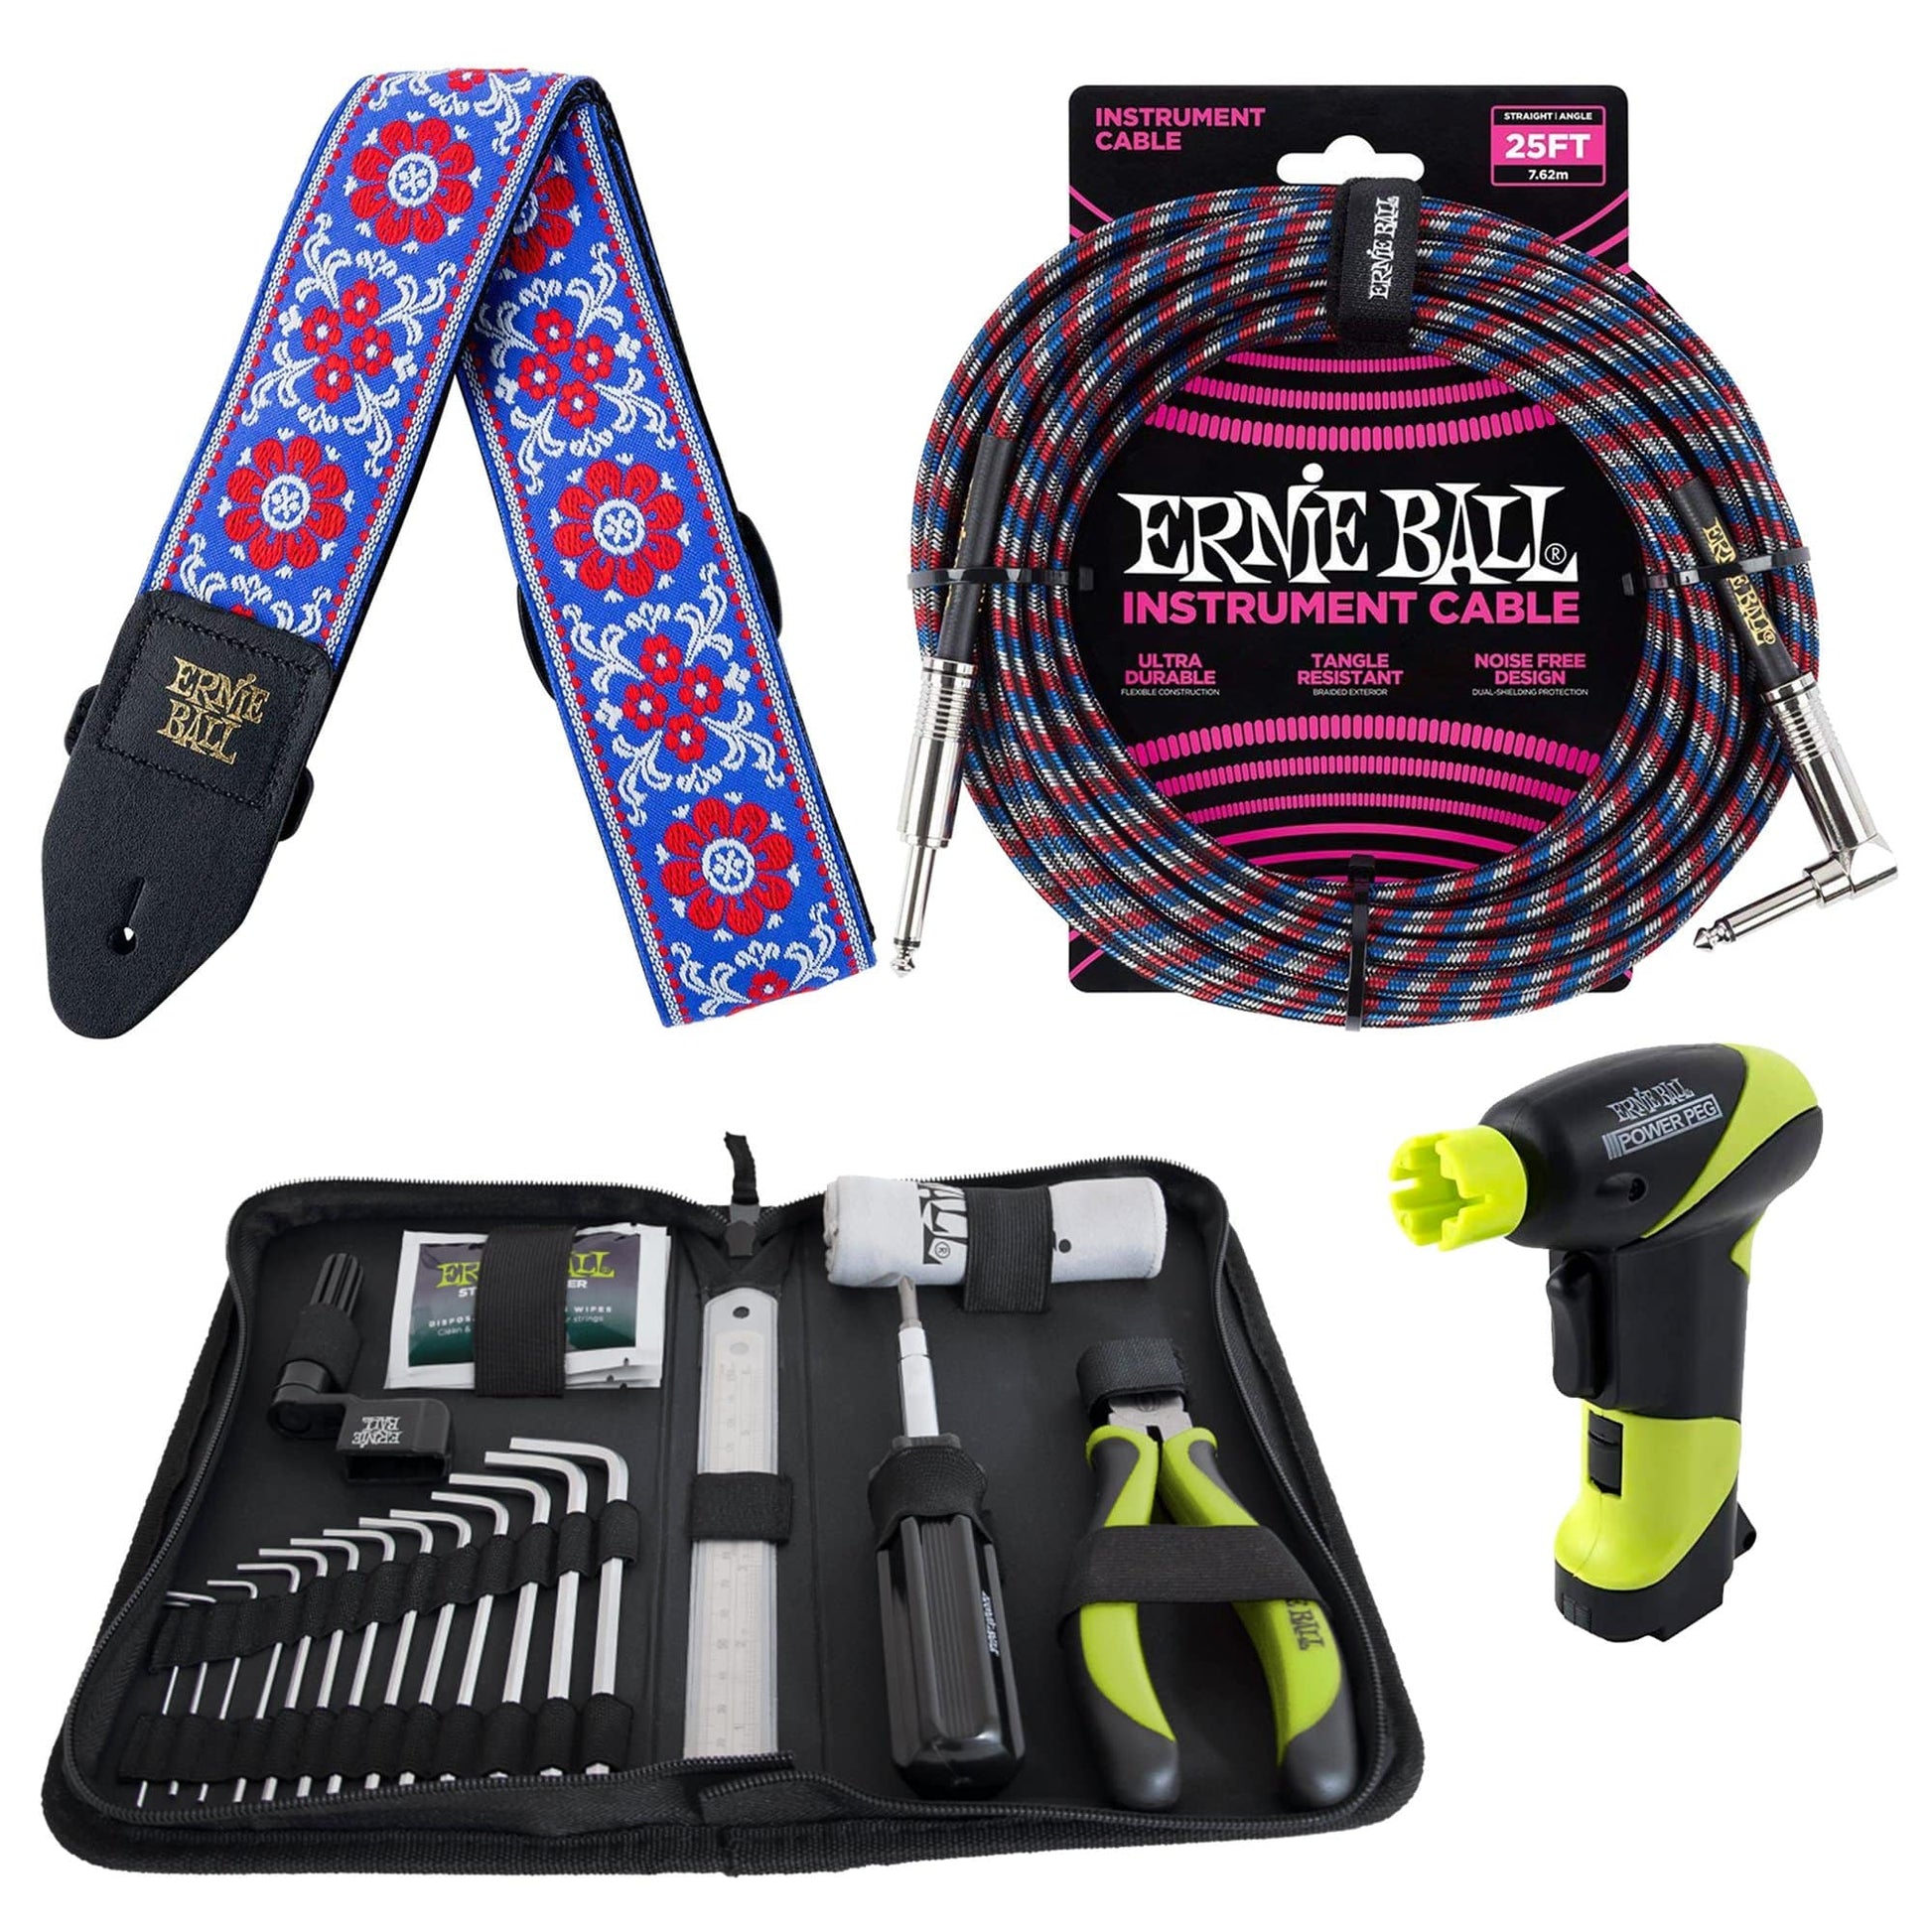 Ernie Ball 4114 Musician's Tool Kit, Power Peg, Jacquard Strap and Braided Cable Bundle #20 Accessories / Tools